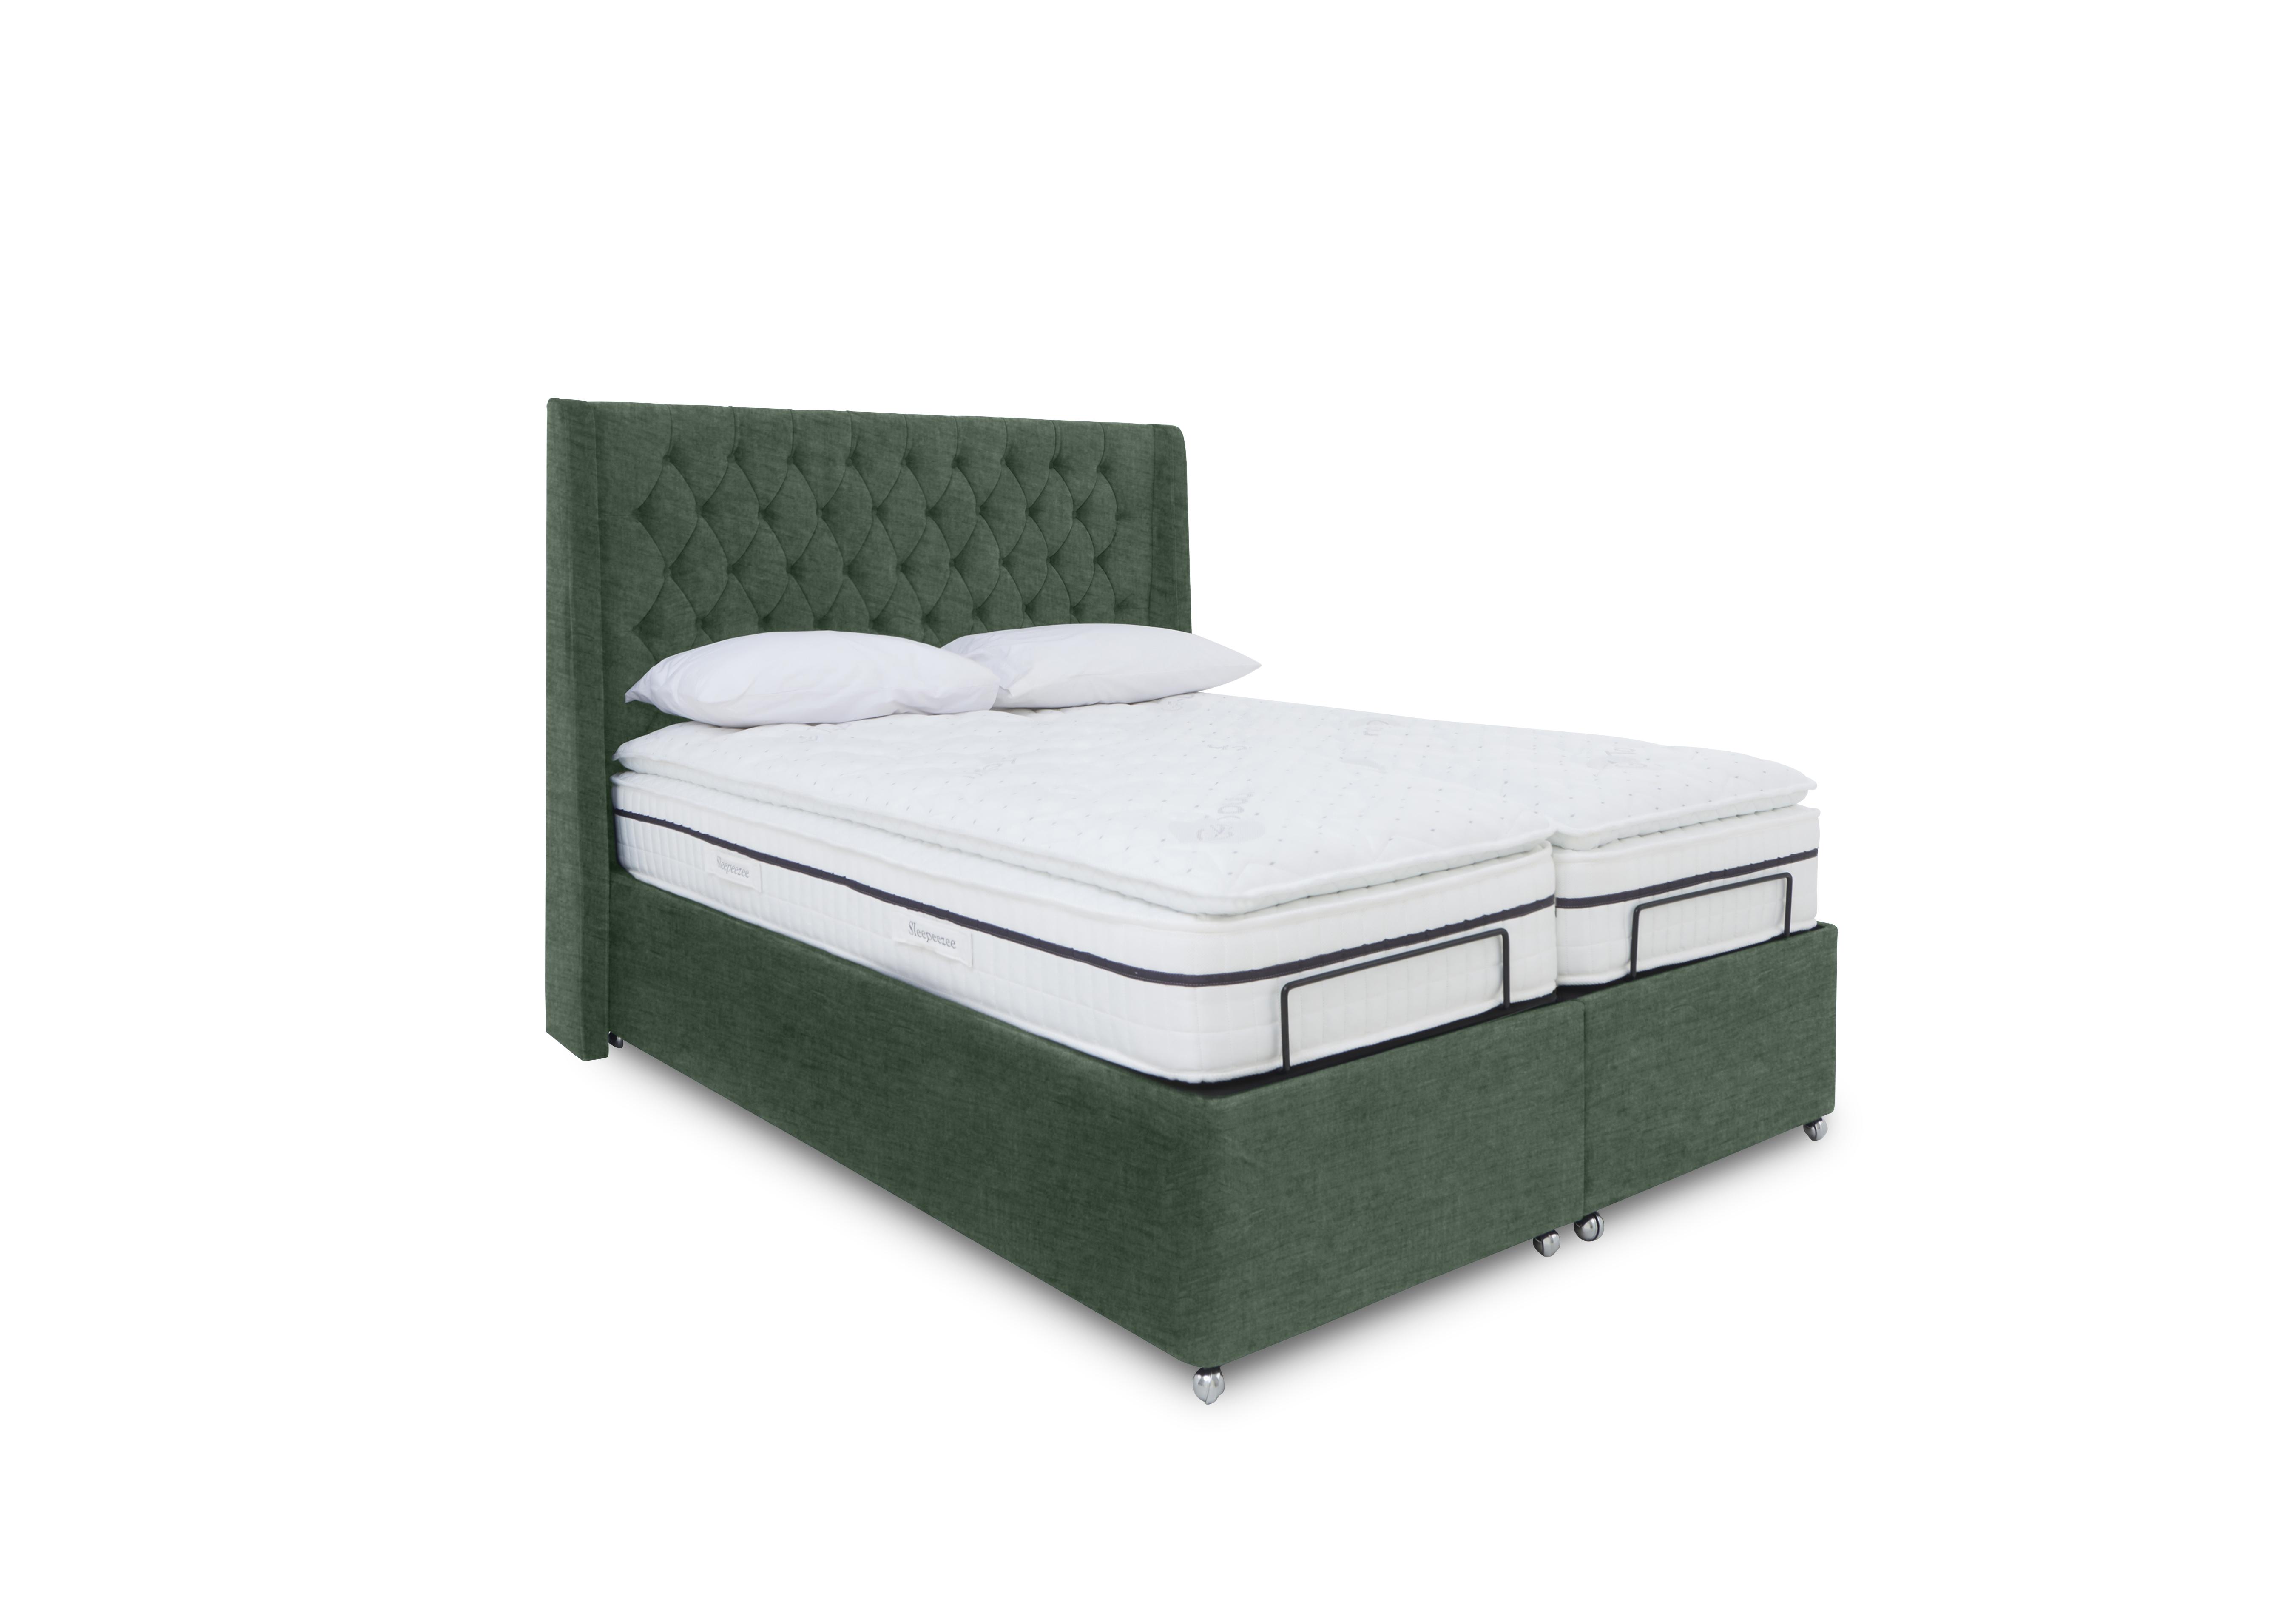 E-Motion Zen Dual Adjustable Ottoman Divan Base with Massage Function and Headboard in 502 Tormaline Green on Furniture Village